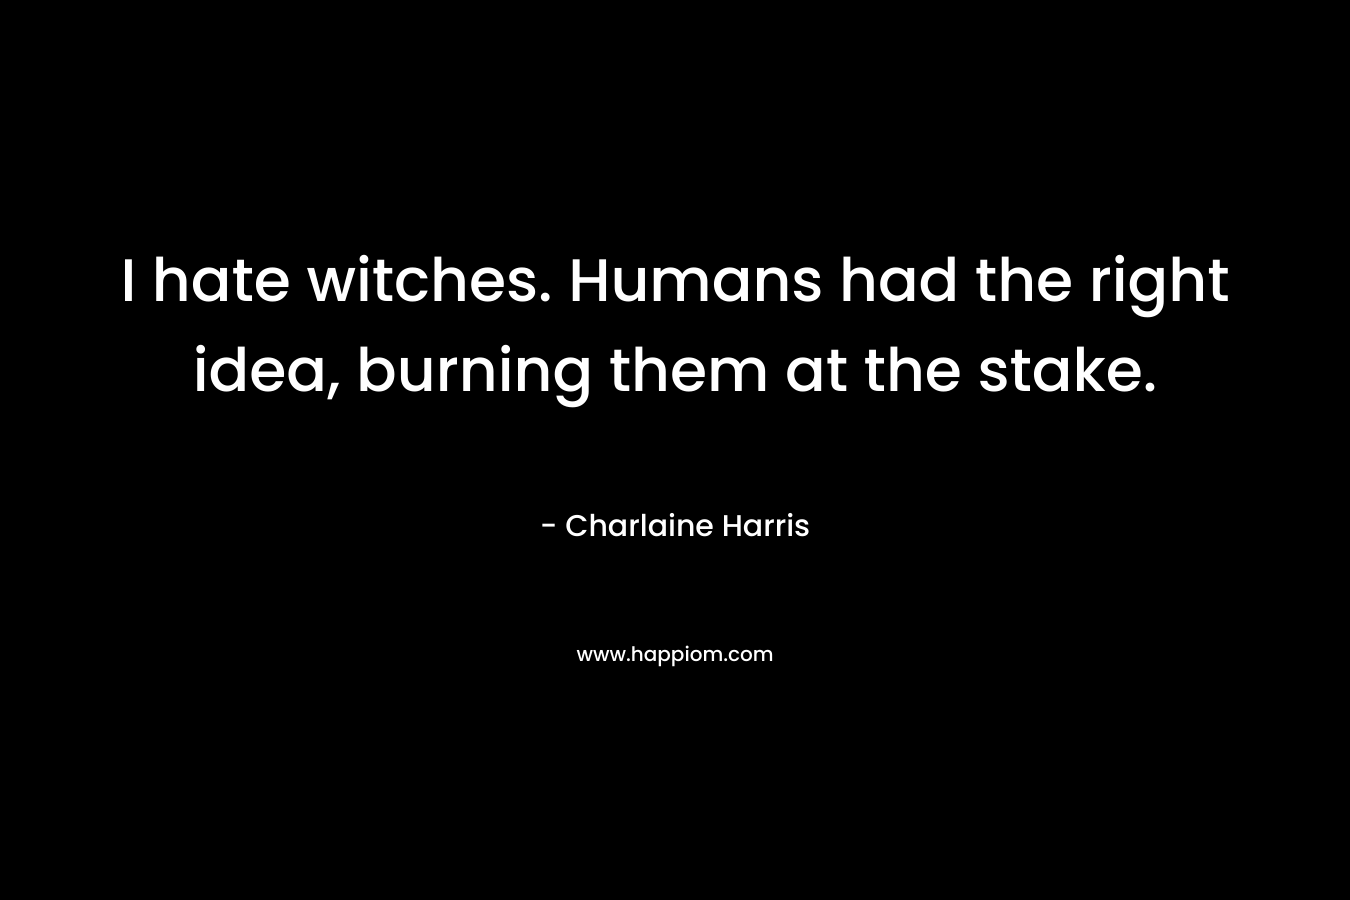 I hate witches. Humans had the right idea, burning them at the stake. – Charlaine Harris